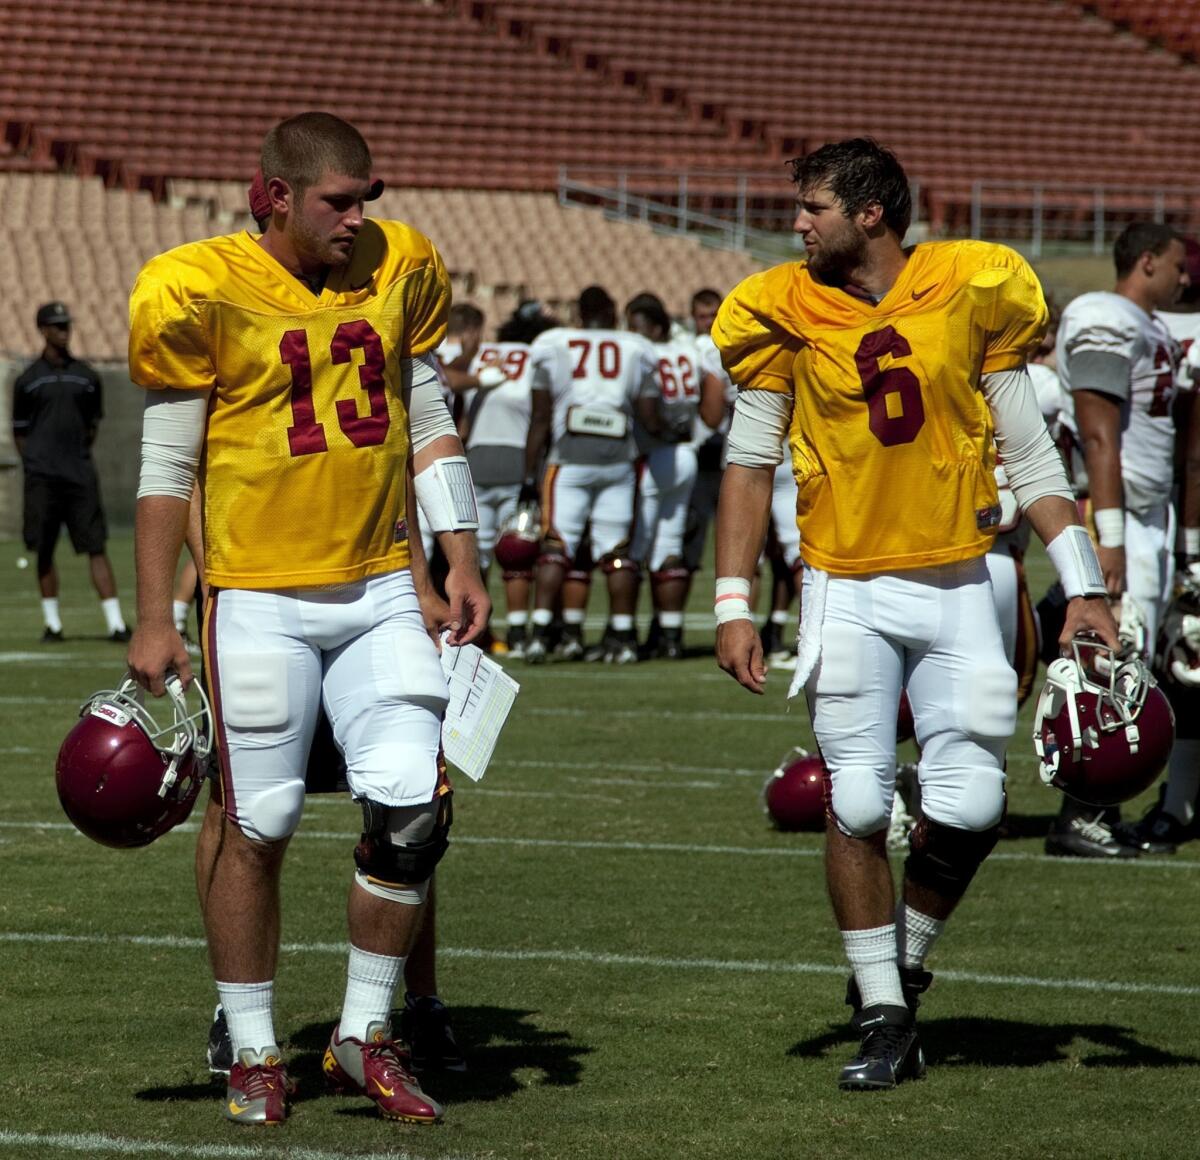 USC quarterbacks Max Wittek, left, and Cody Kessler walk off the field following Friday's practice at the Coliseum. Kessler performed well in the session.